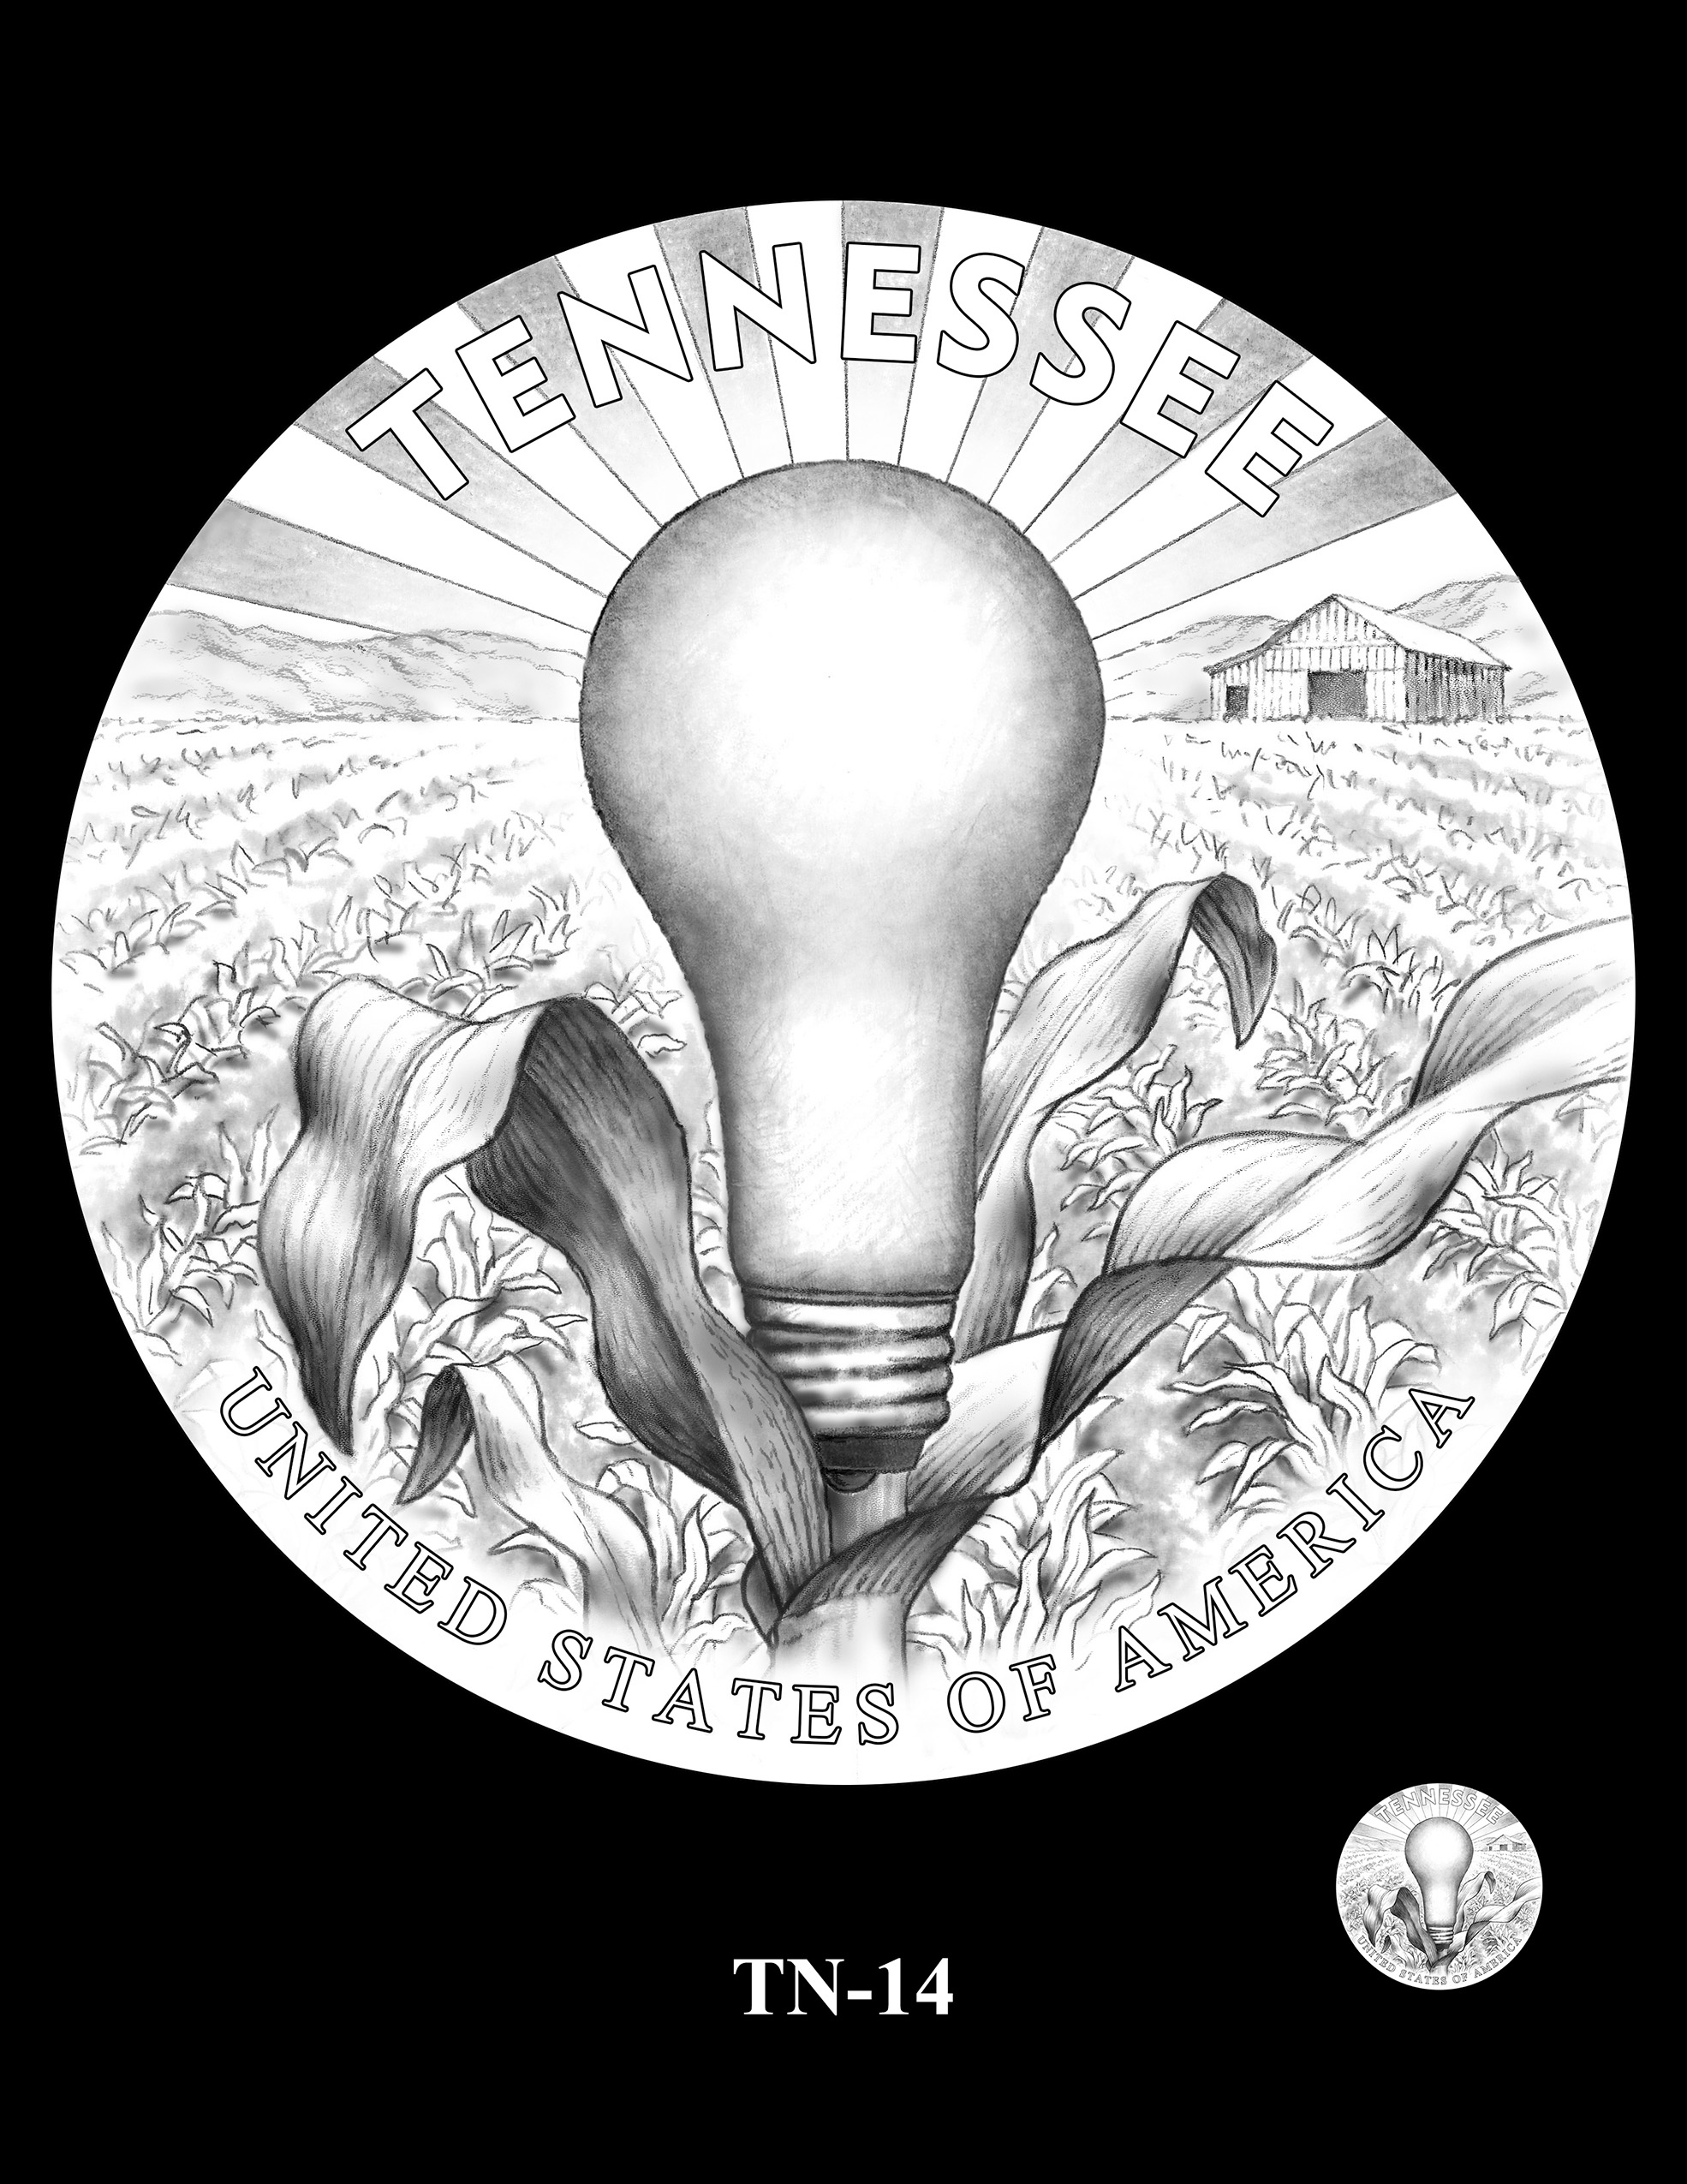 TN-14 -- 2022 American Innovation $1 Coin - Tennessee